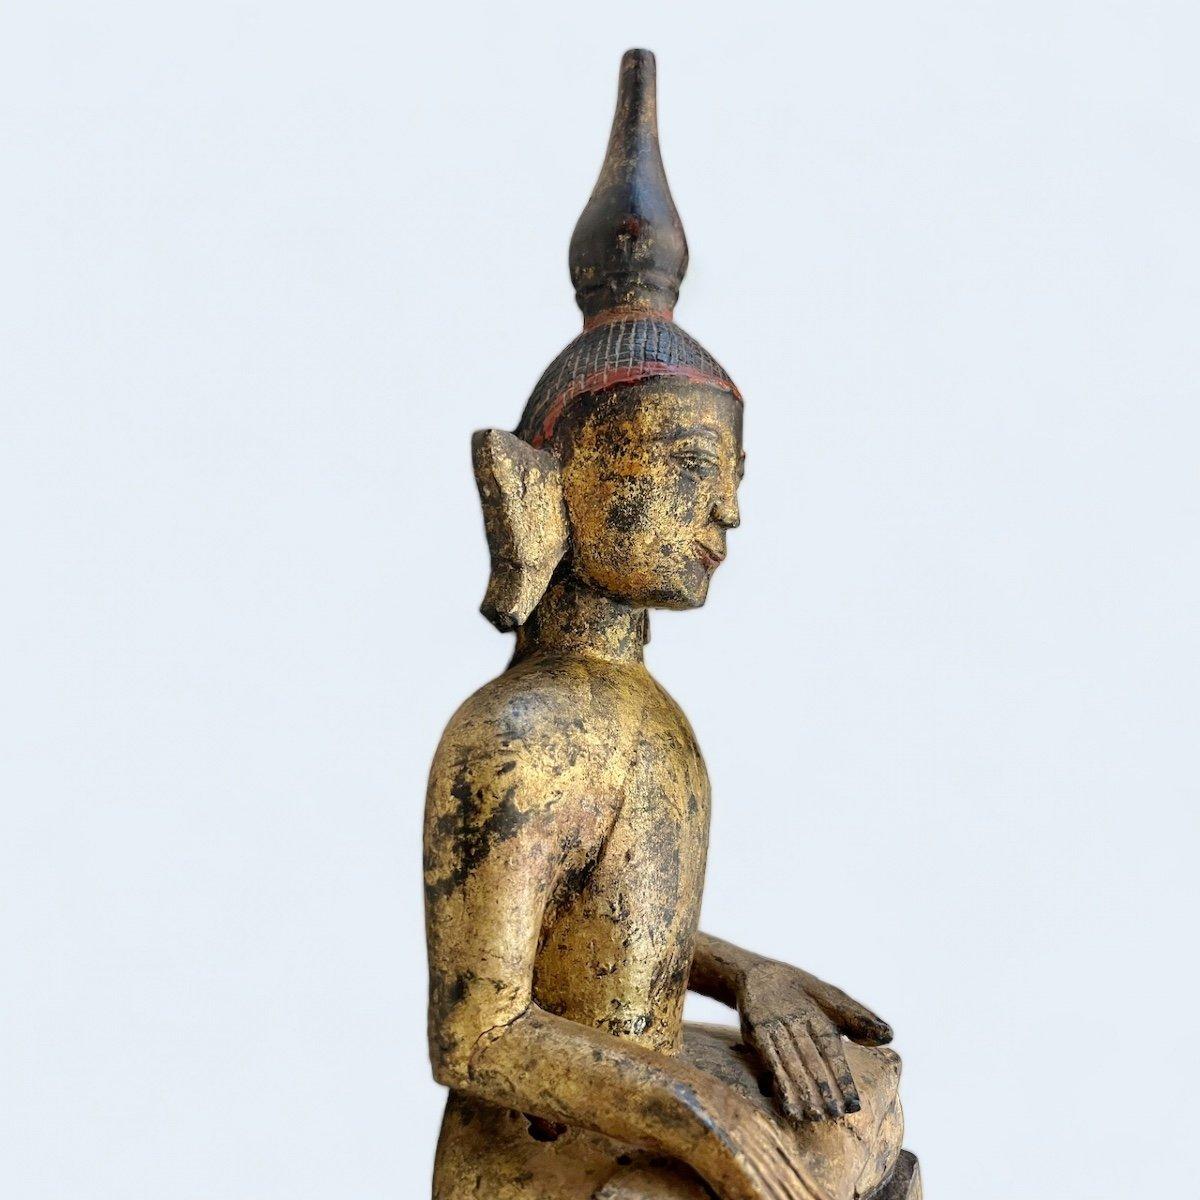 We present you this unique and wonderful seated Buddha from Laos, dating back to the early 19th century or possibly earlier. It depicts the wandering ascetic and religious teacher in meditation, clad in monk's attire, his visage radiating deep inner